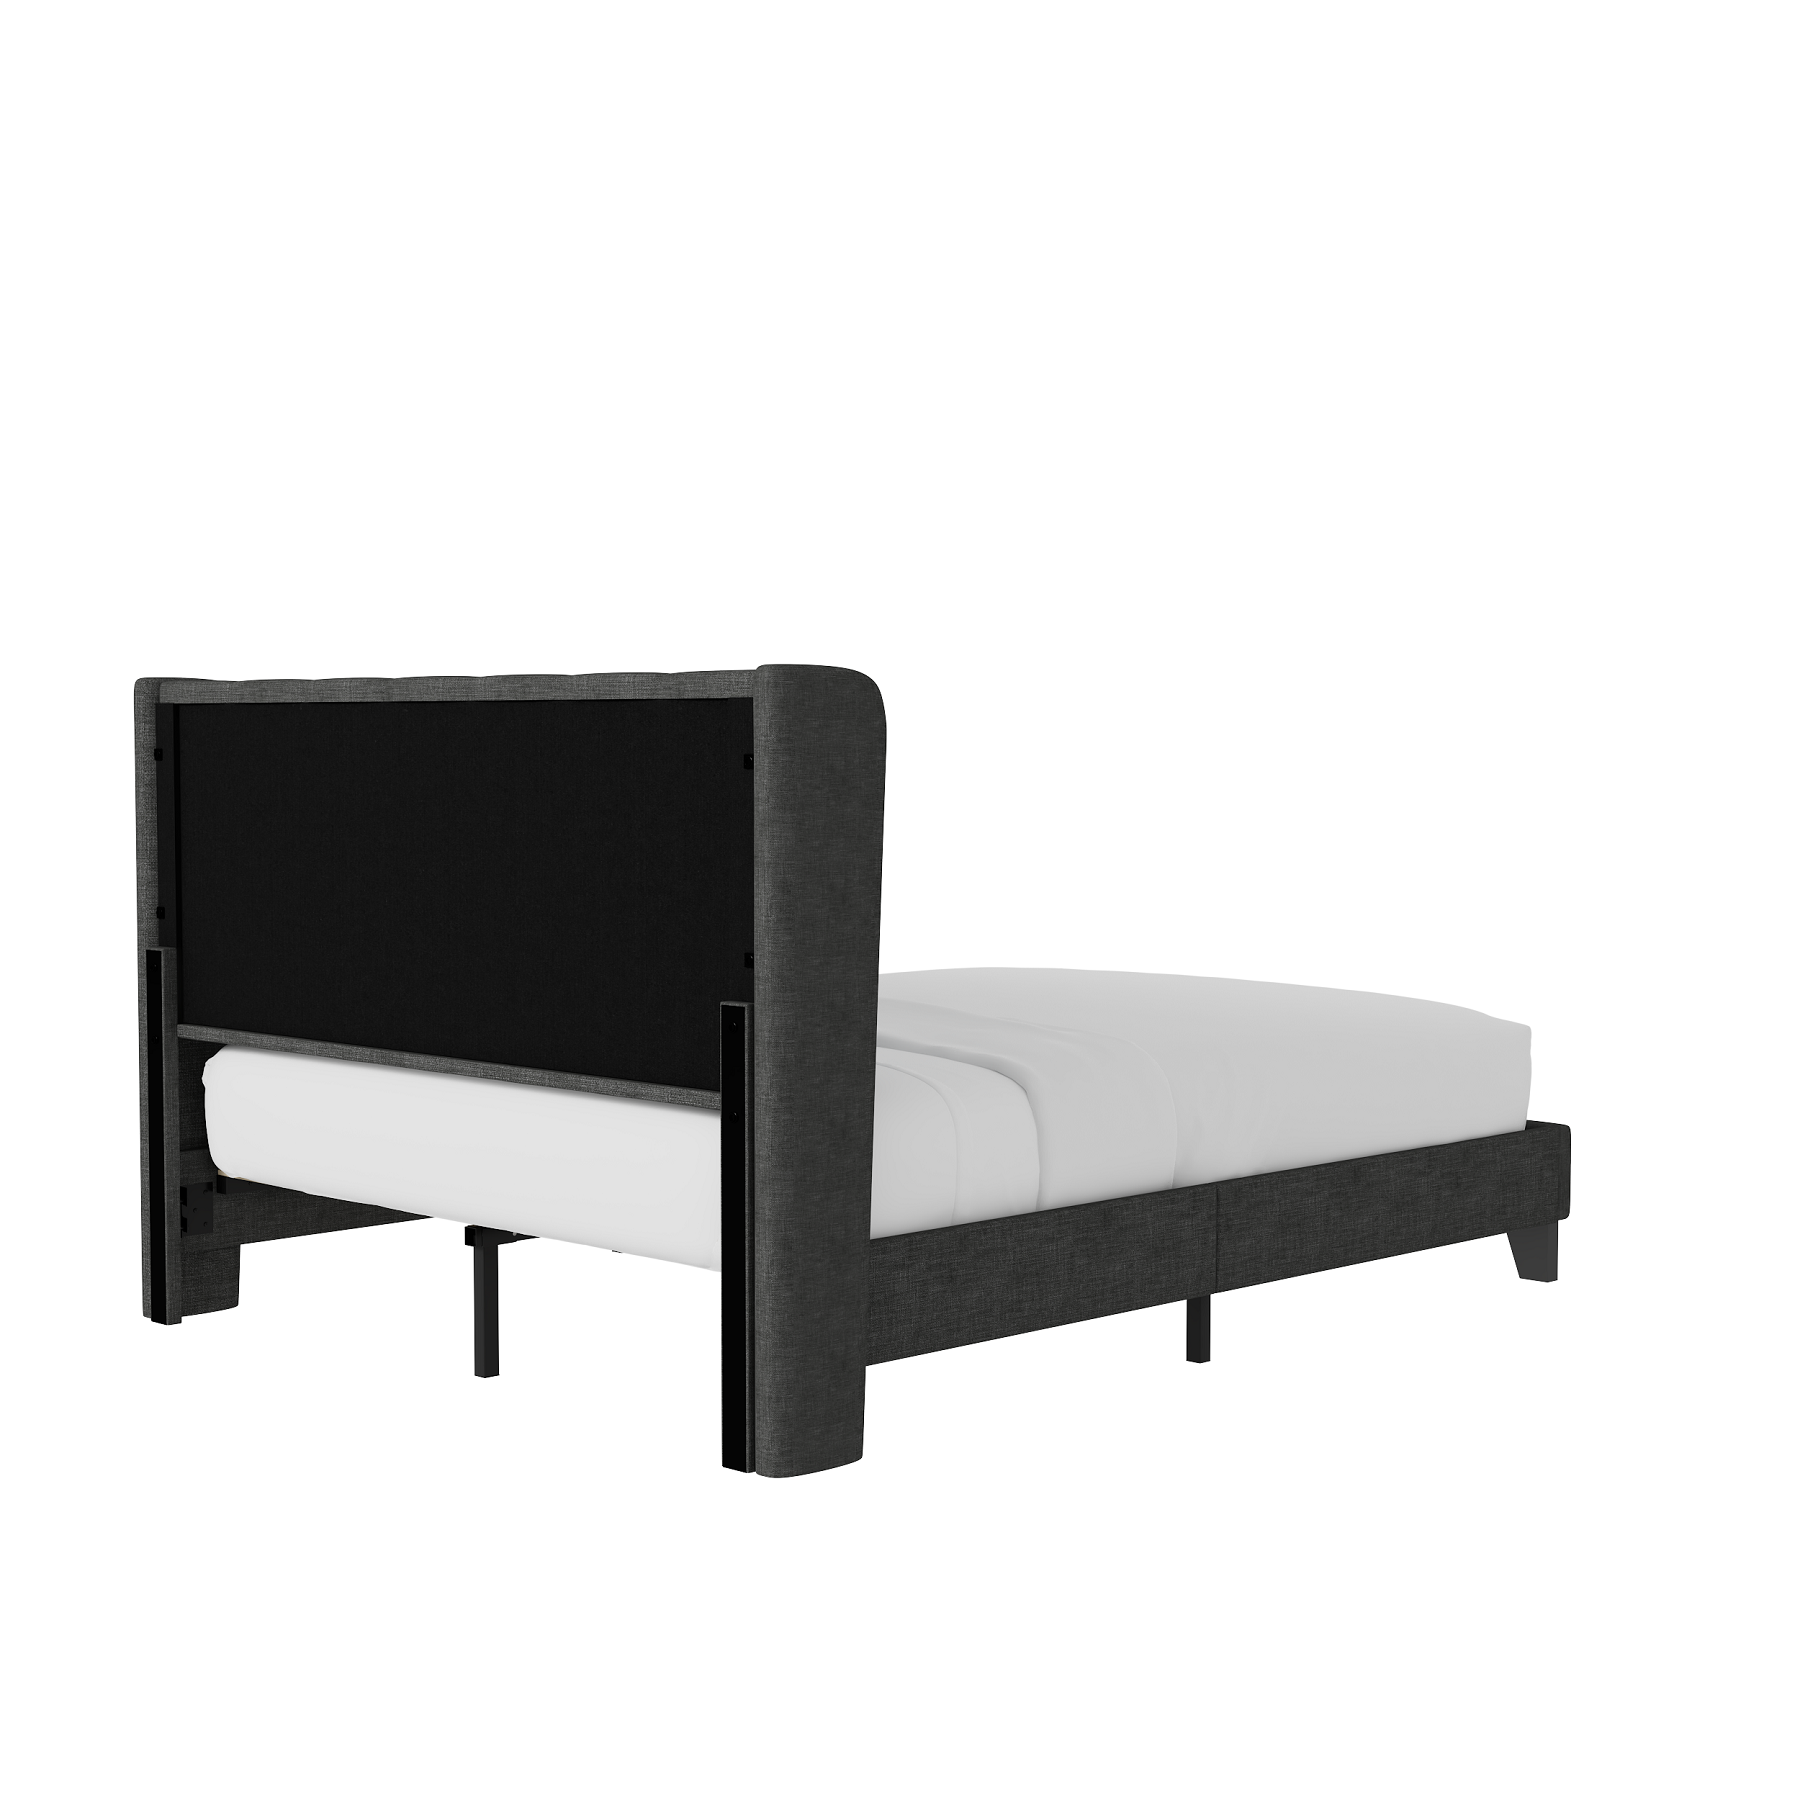 Einfach King Size Platform Bed Frame with Square Stitched Wingback  Headboard, Dark Grey